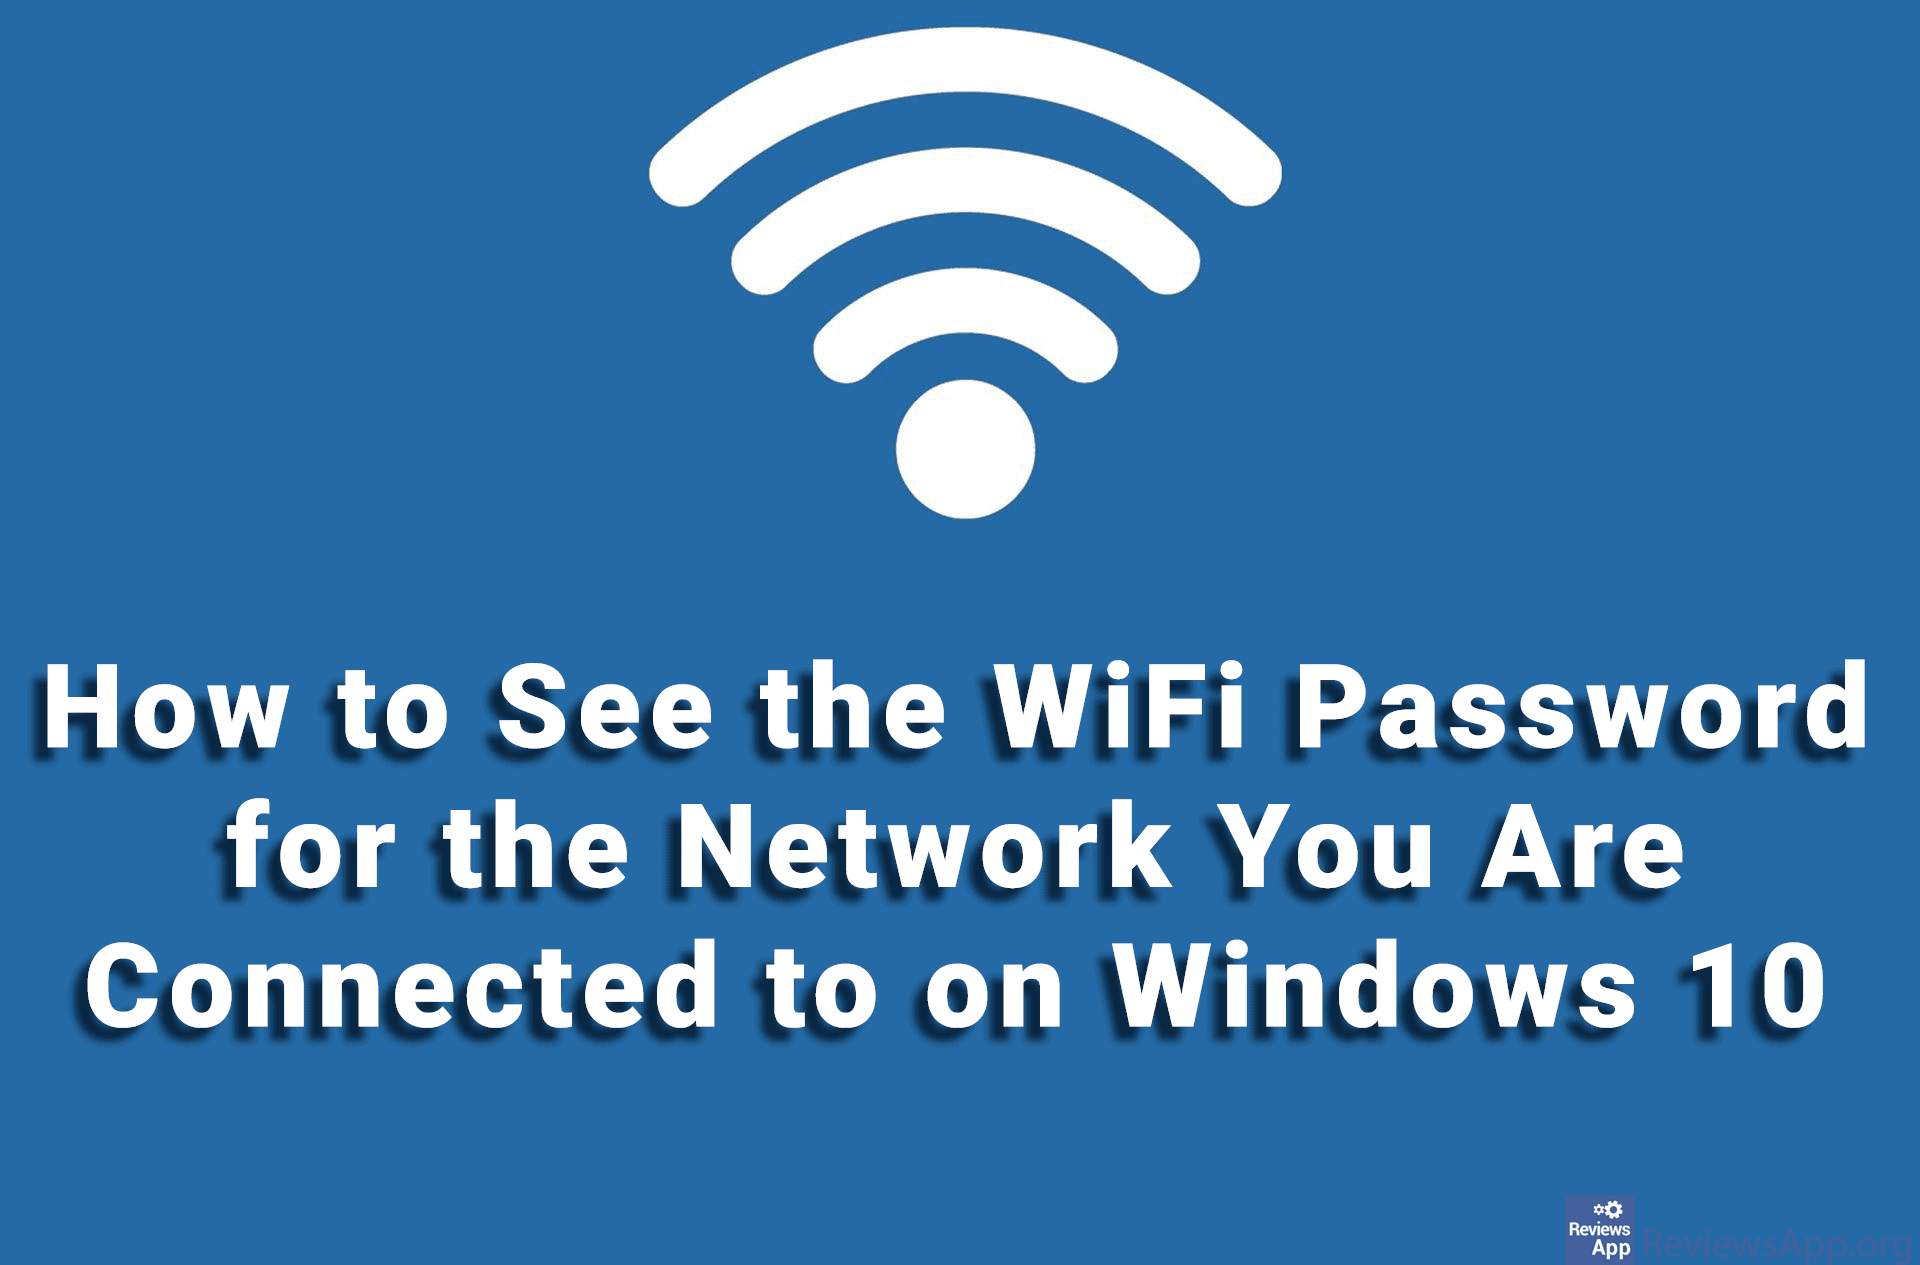 How to See the WiFi Password for the Network You Are Connected to on Windows 10